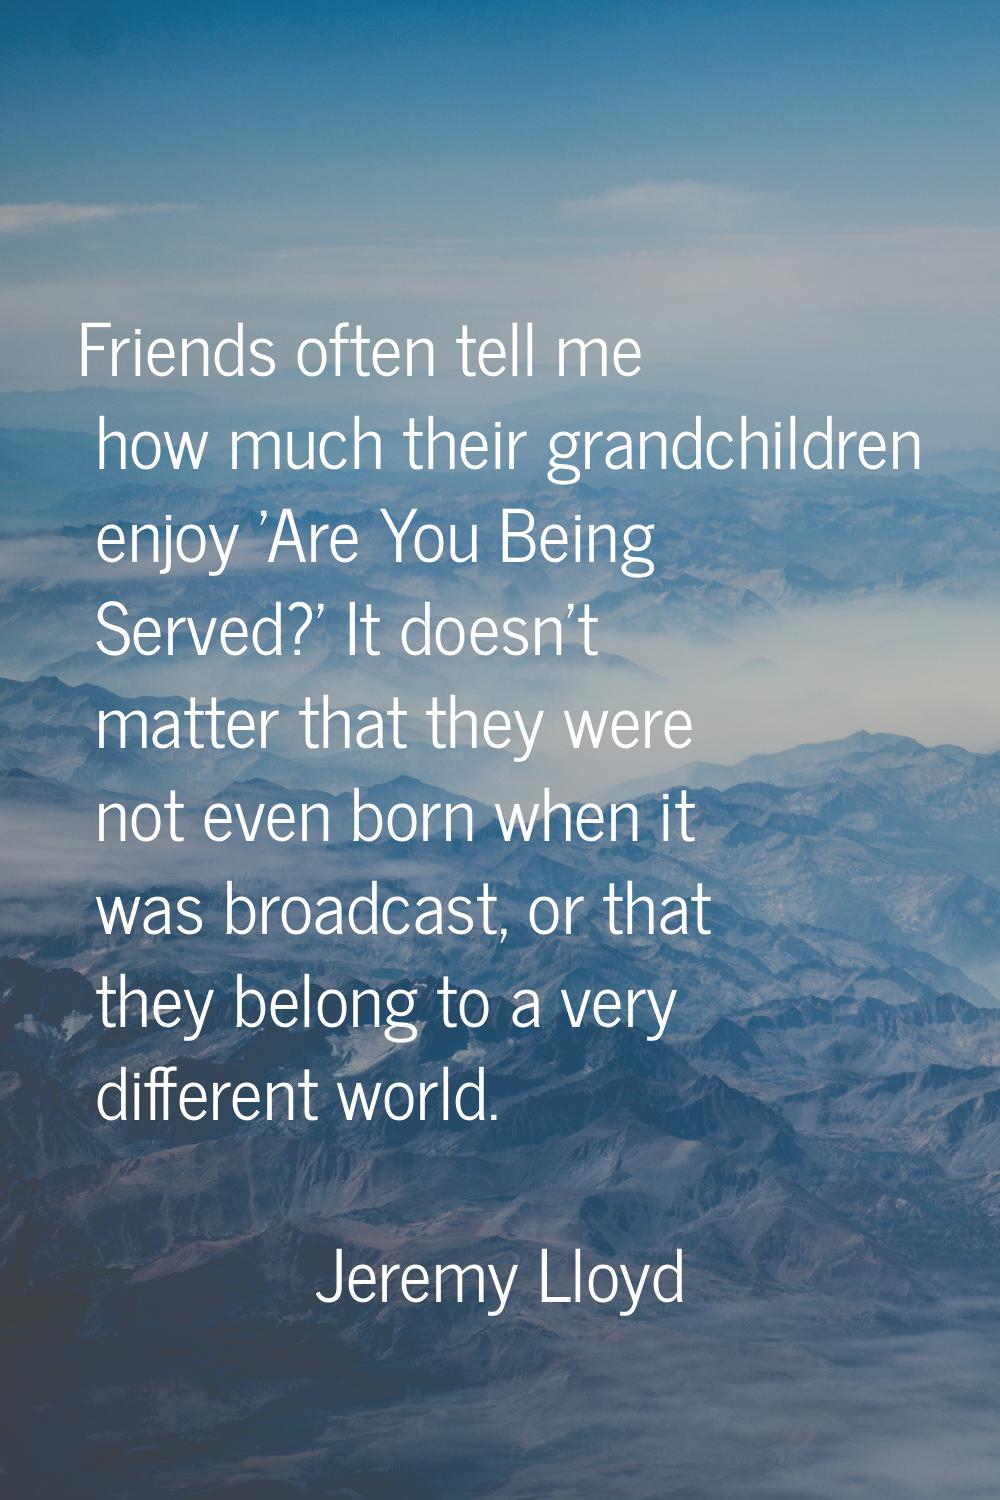 Friends often tell me how much their grandchildren enjoy 'Are You Being Served?' It doesn't matter 